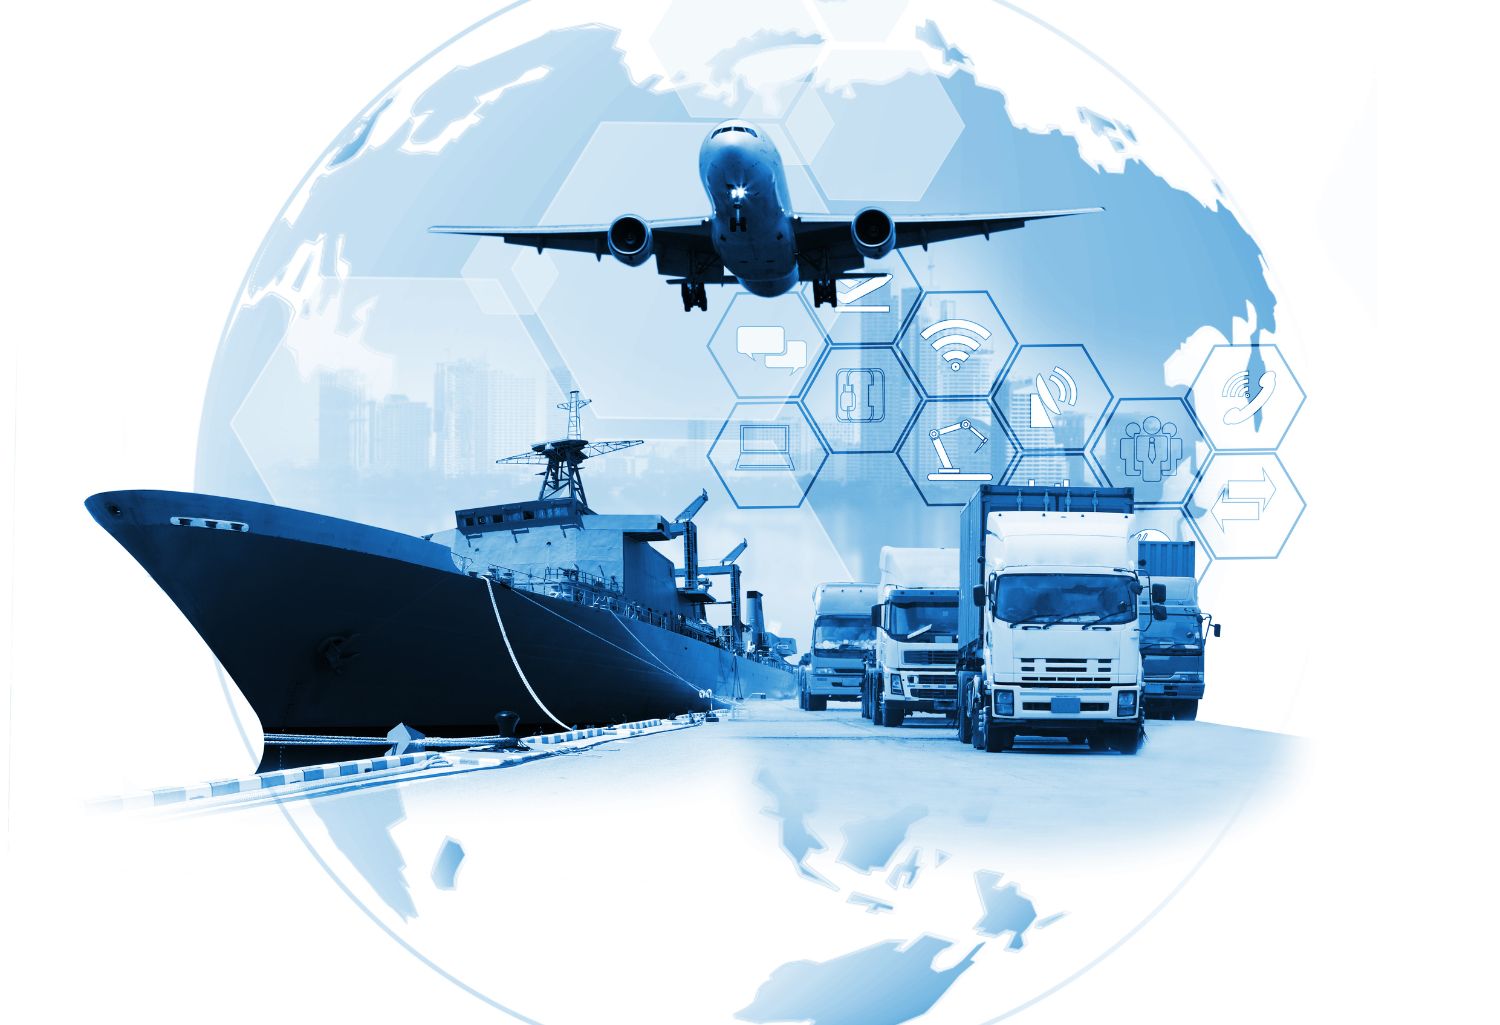 The world logistics, there are world map with logistic network distribution on background and logistics Industrial Container Cargo freight ship for Concept of fast instant shipping. Cross-Border Logistics